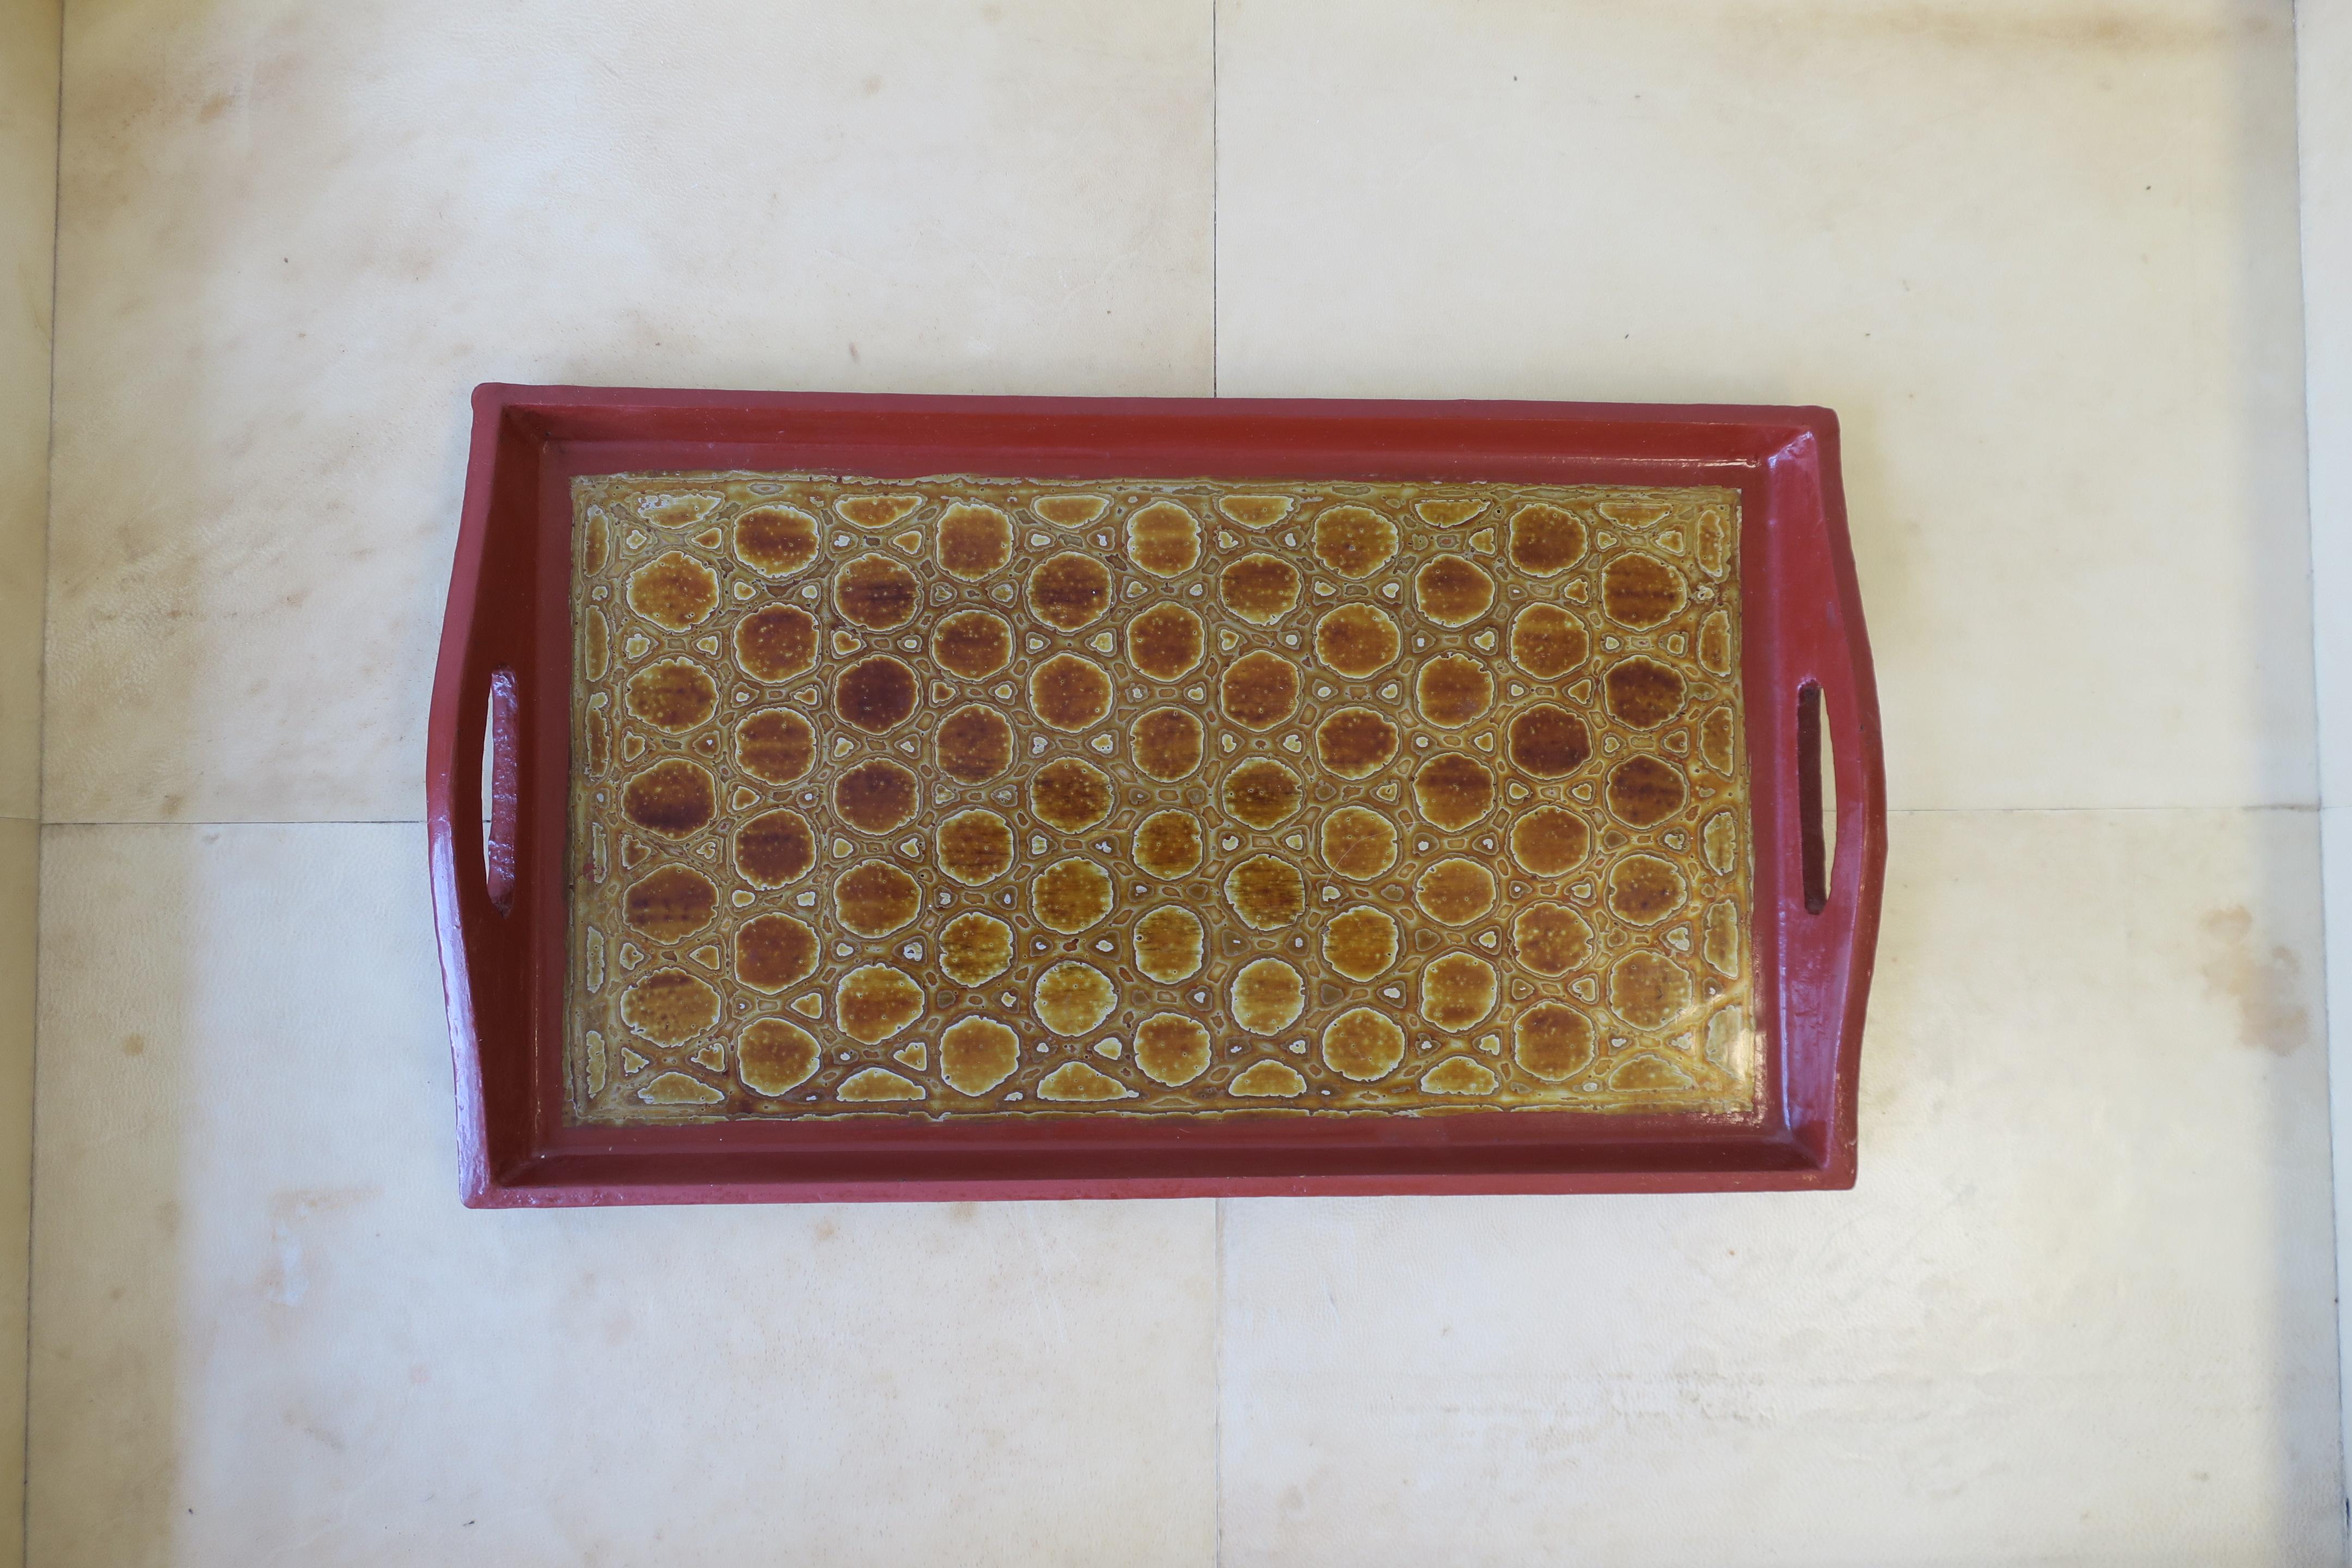 Hollywood Regency Red Burgundy, Gold and Black Lacquer Tray with Reptile-esque Design